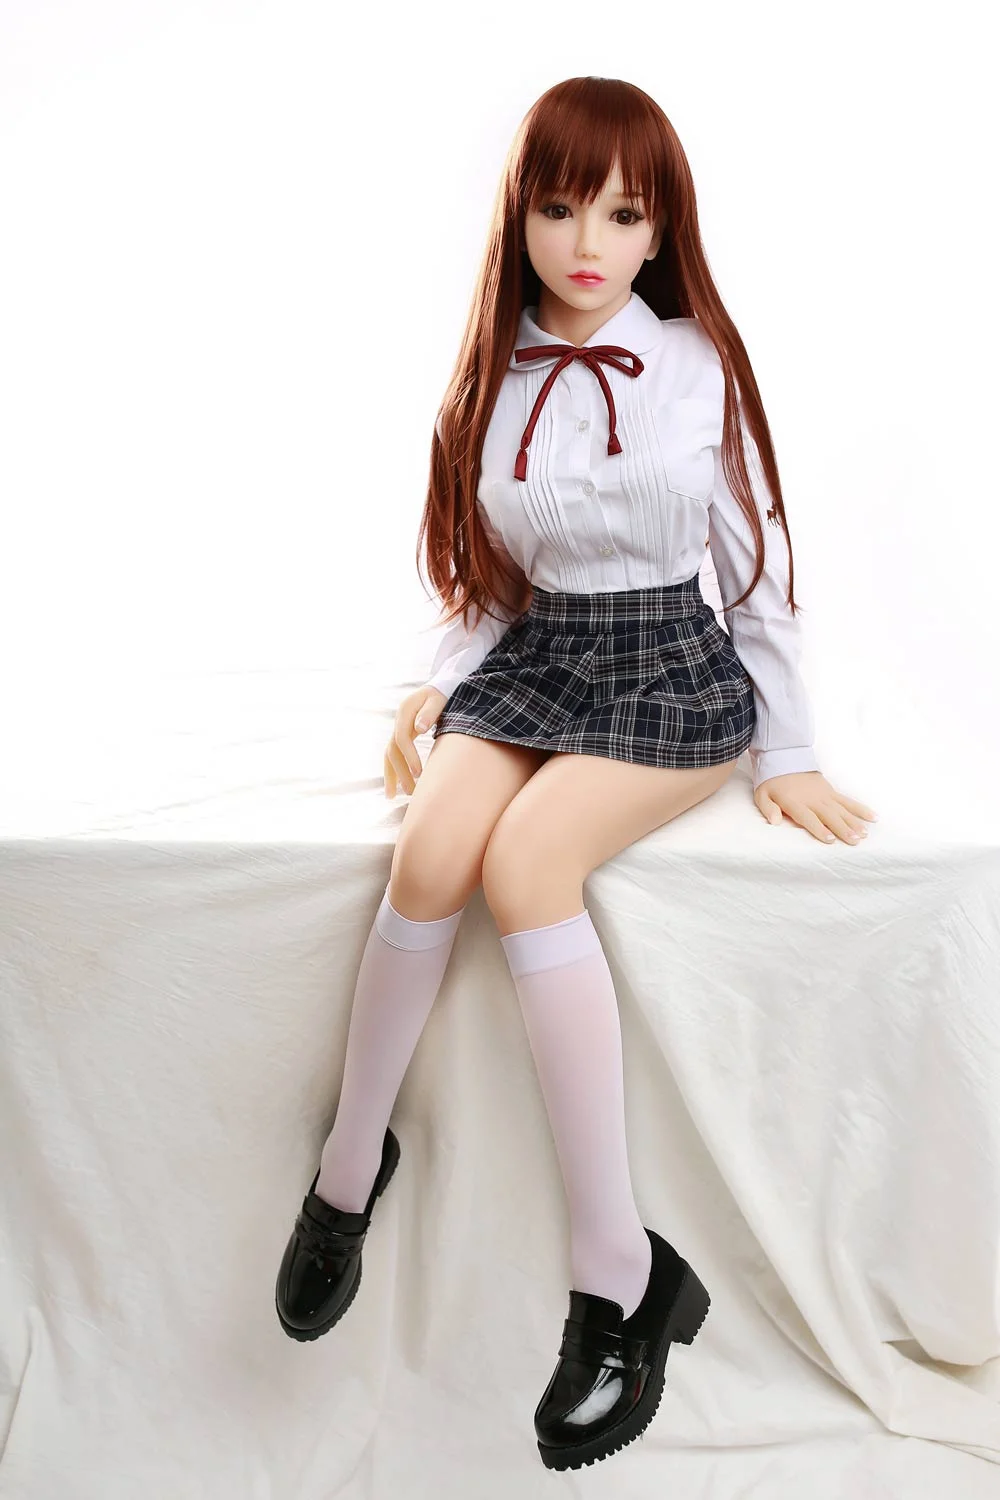 Mini sex doll with hands on the table